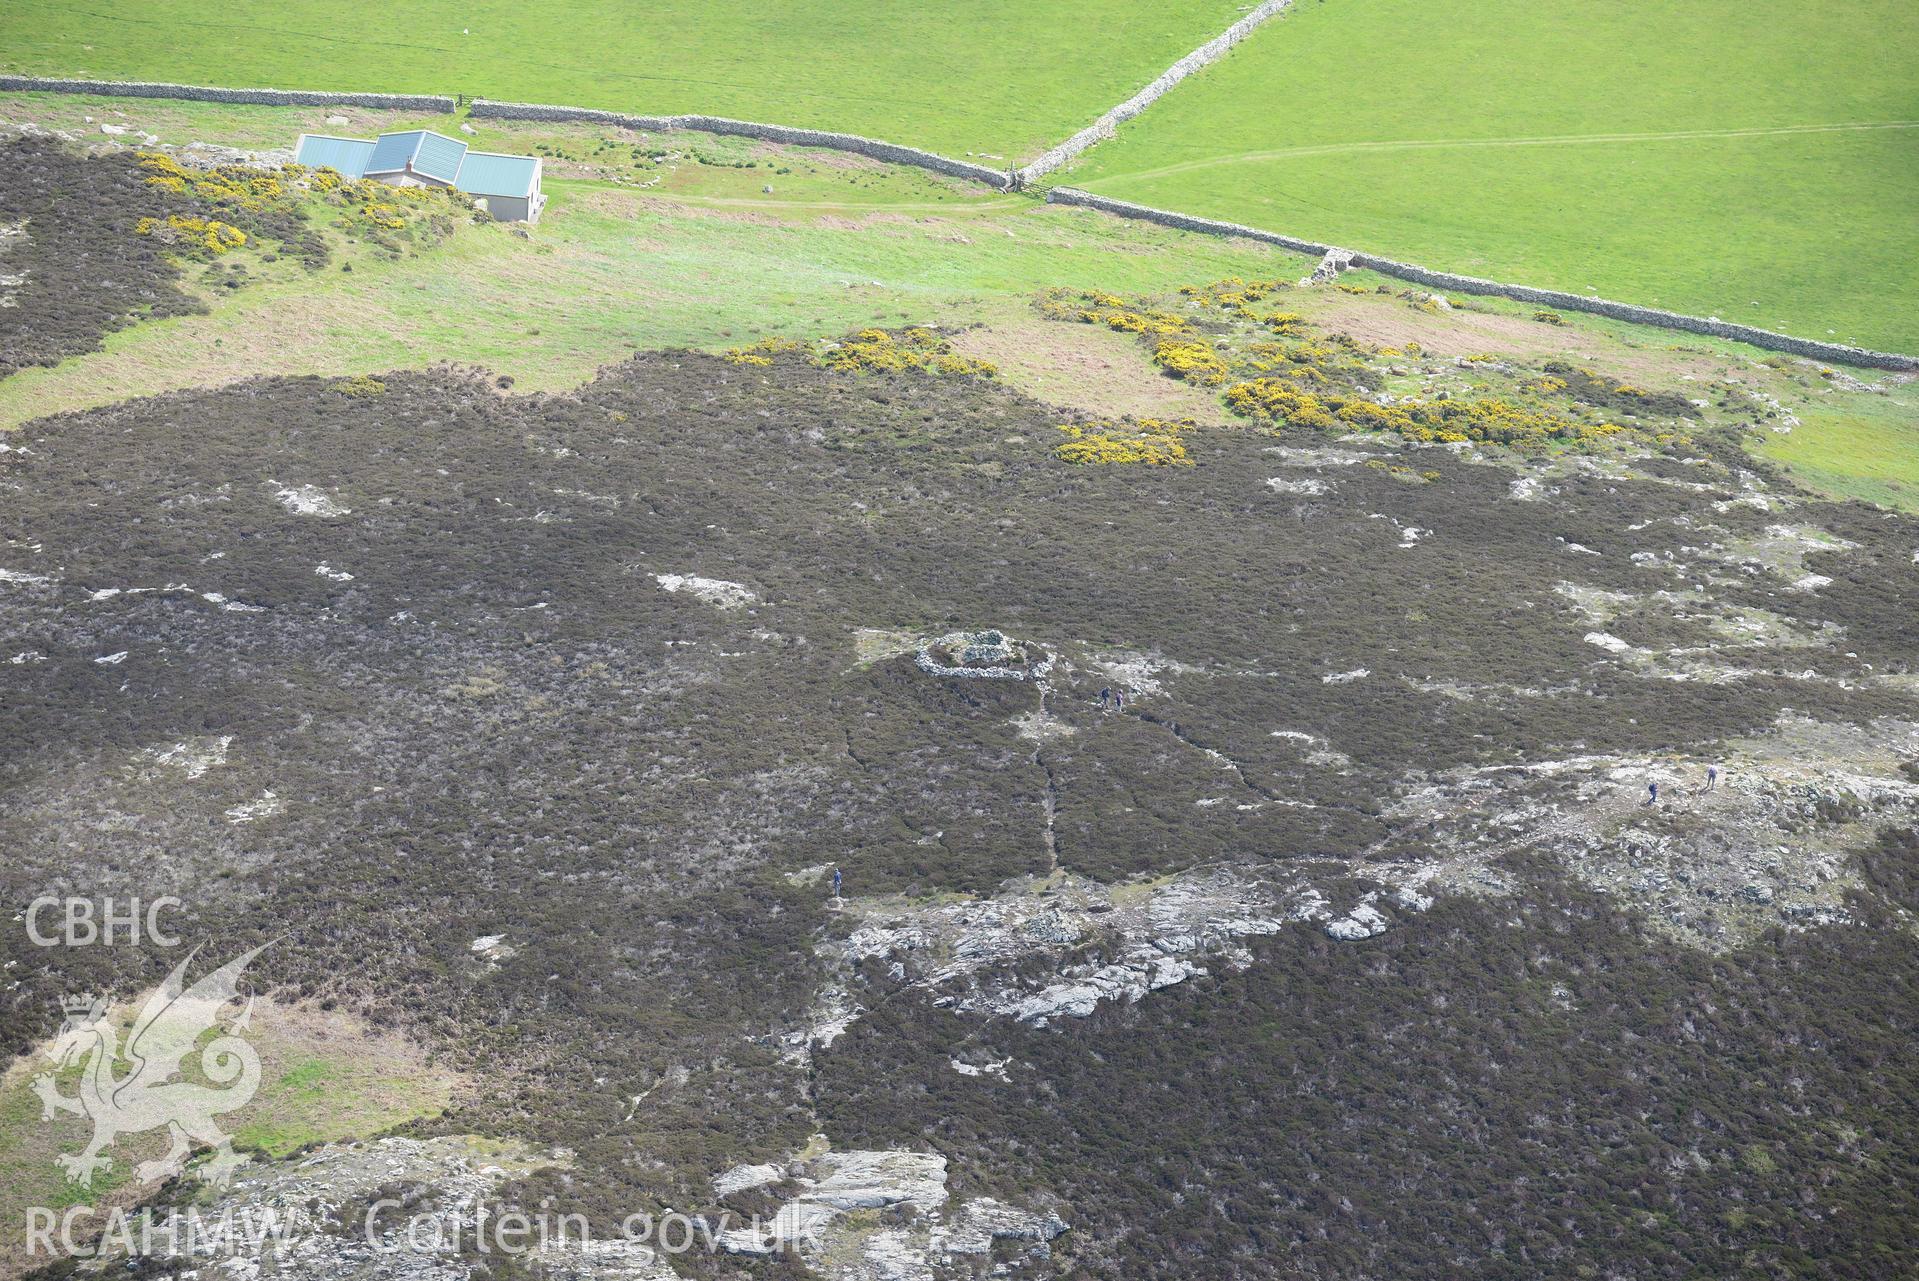 Carn Ysgubor and its relict field walls on Ramsey Island. Oblique aerial photograph taken during the Royal Commission's programme of archaeological aerial reconnaissance by Toby Driver on 13th May 2015.